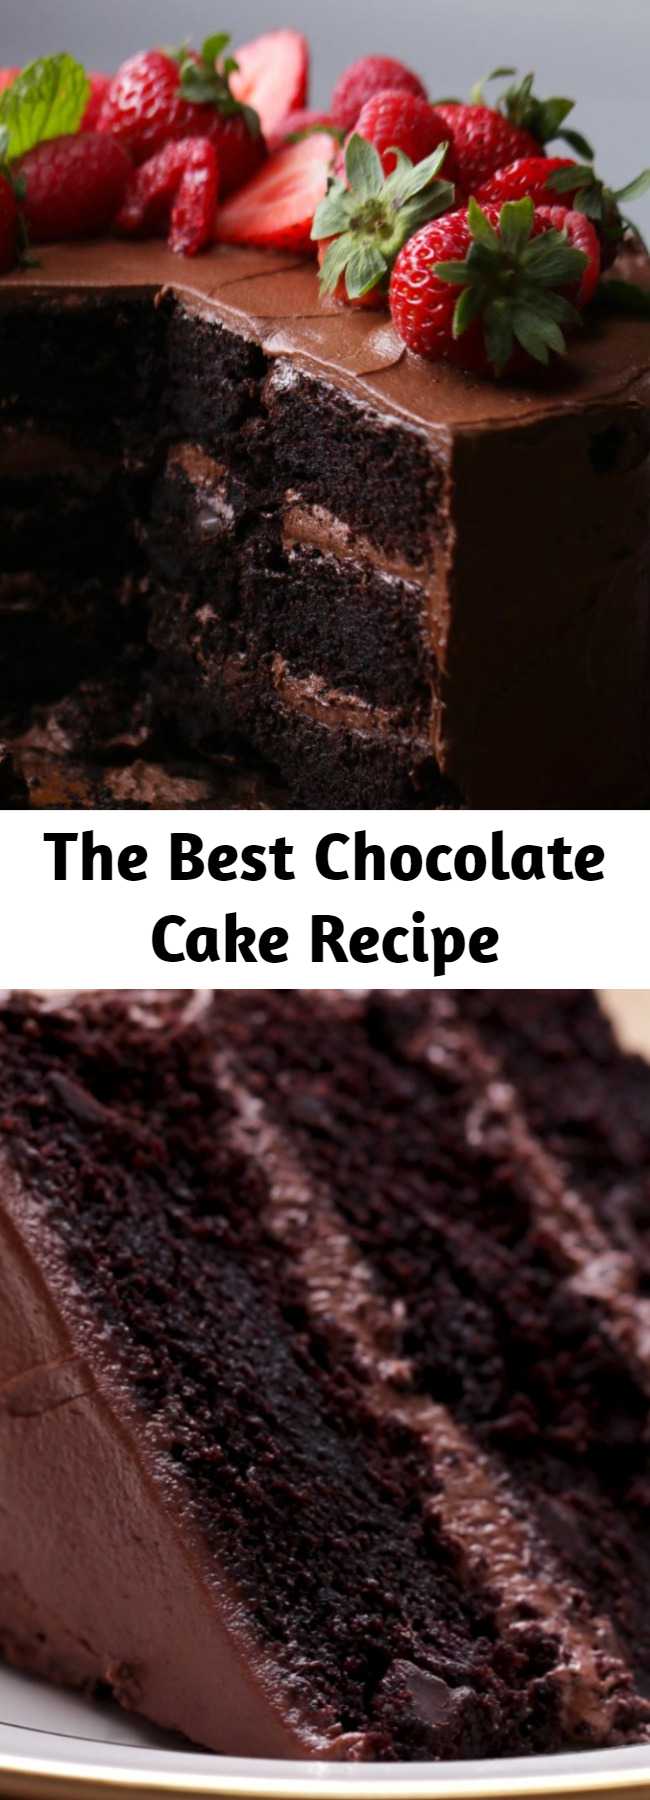 The Best Chocolate Cake Recipe - The Ultimate Chocolate Cake. This cake was a massive hit for a friends birthday, super moist and tasty! #cake #chocolate #dessert